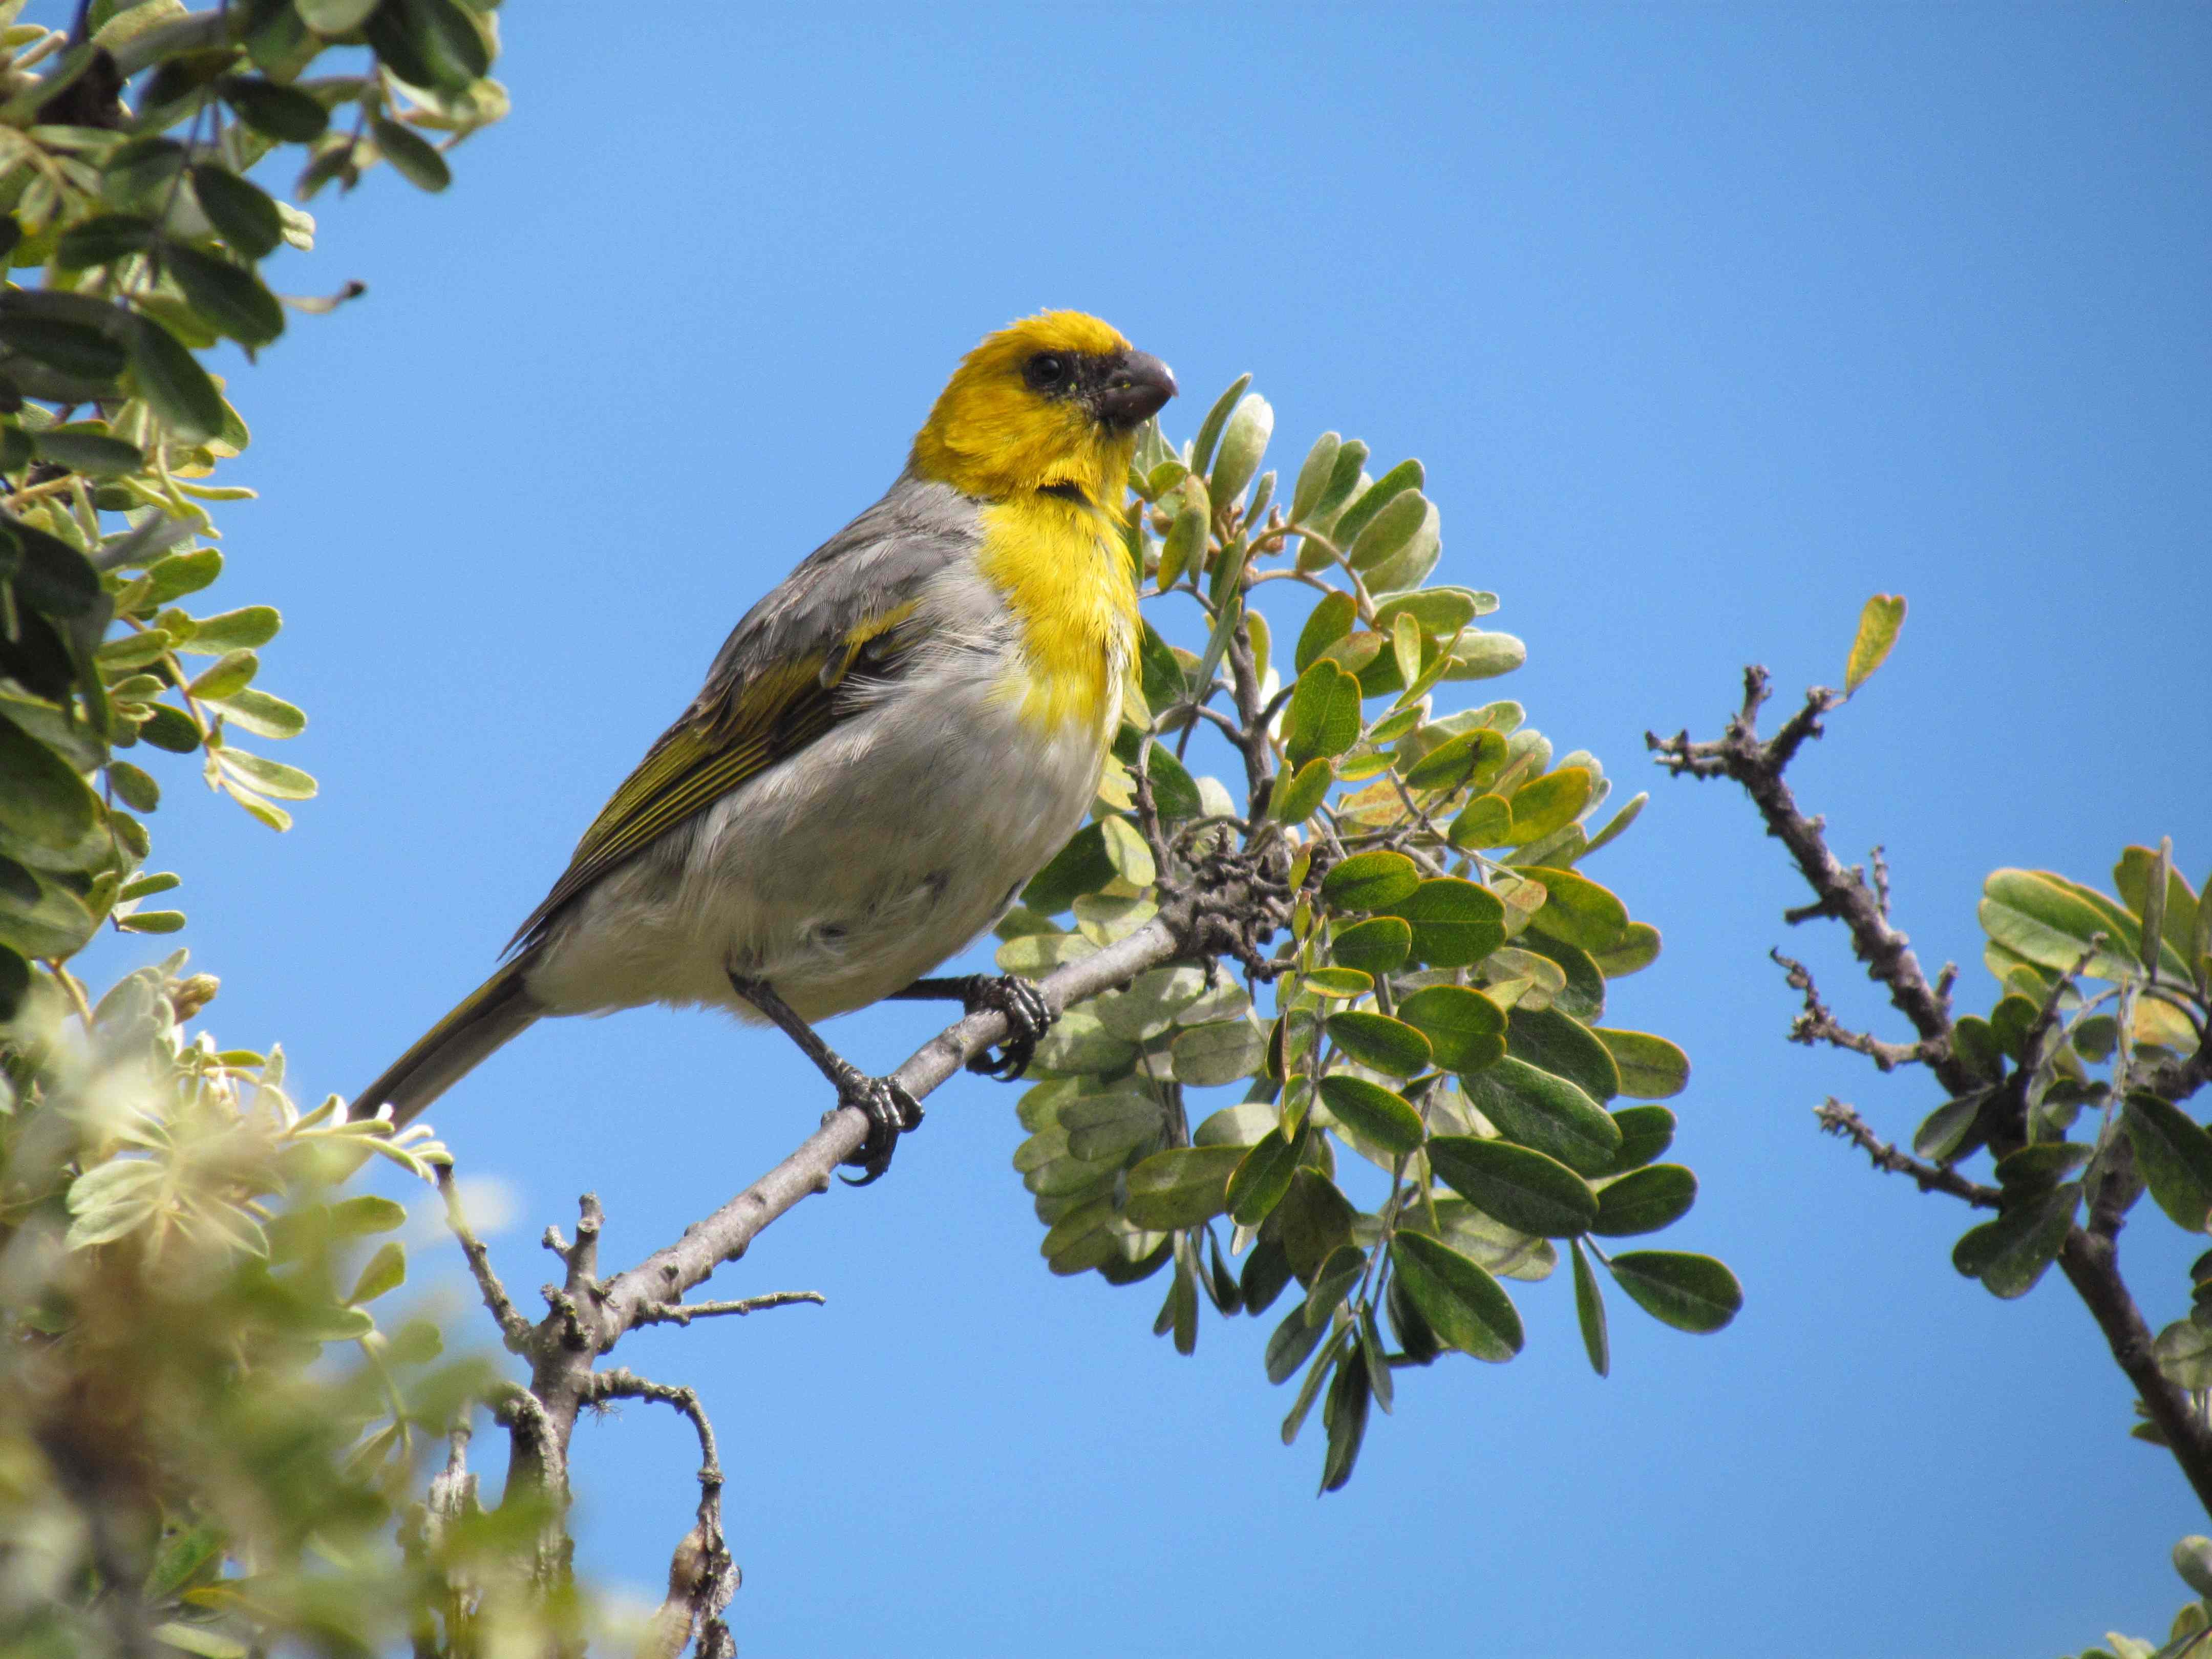 Palila bird, found only on the upper slopes of Mauna Kea